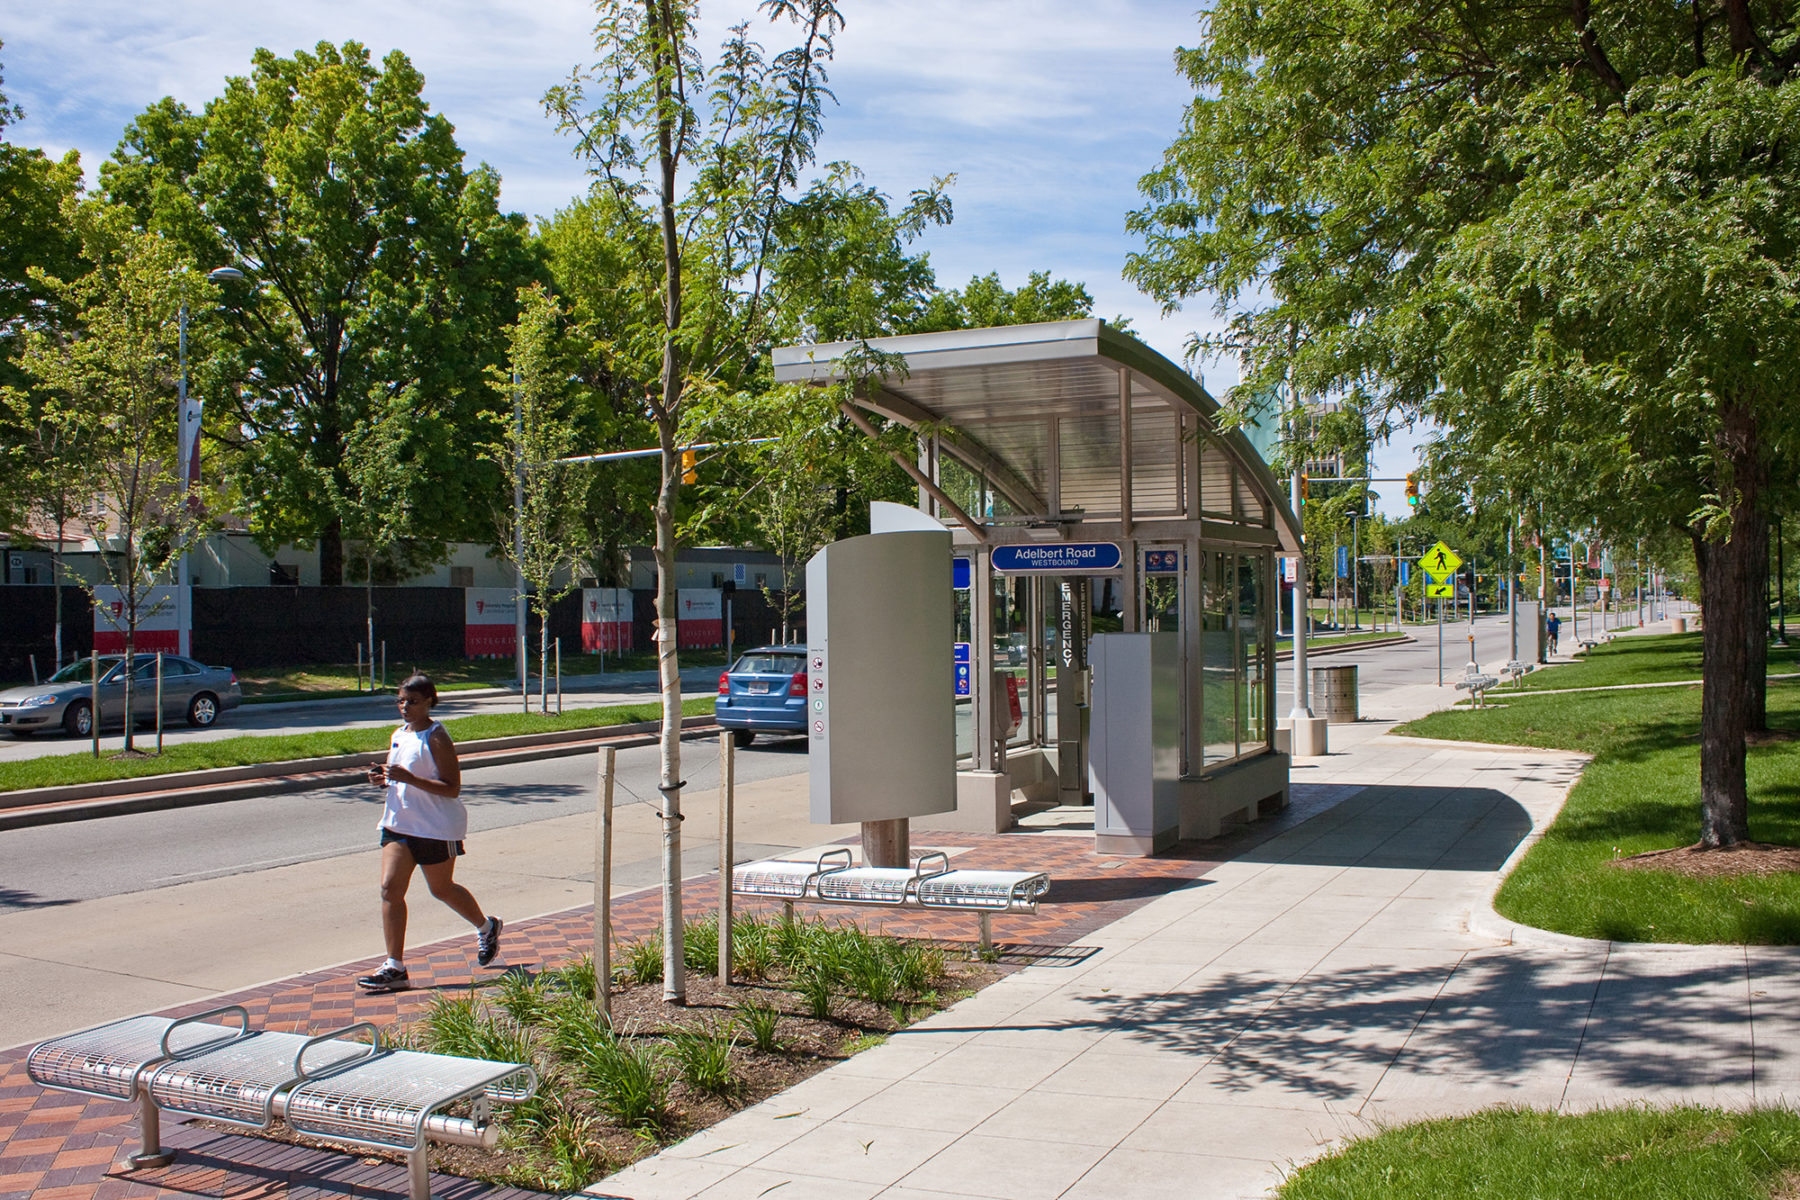 daytime photo of bus stop with runner on sidewalk